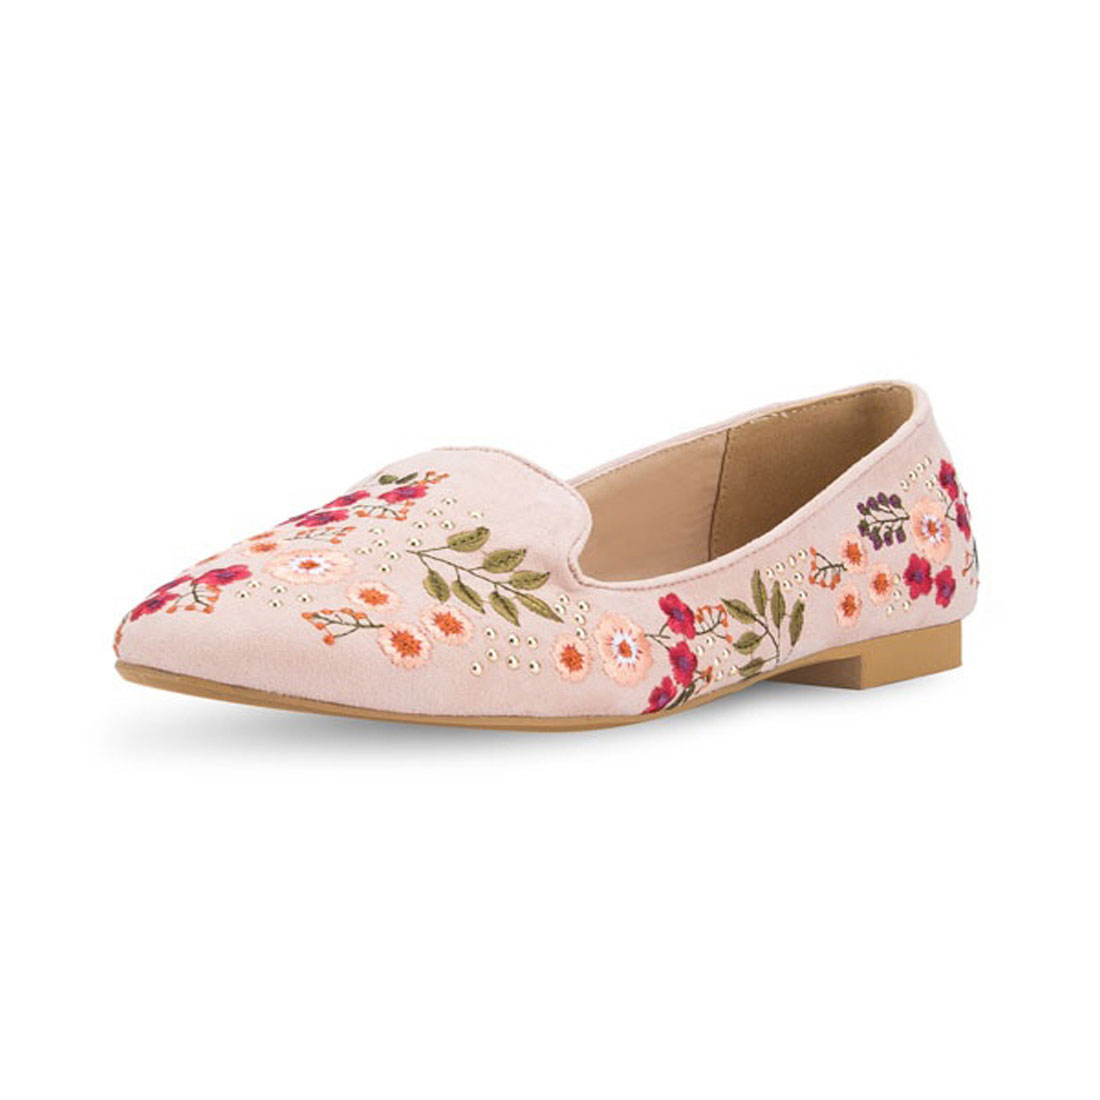 Sweet nude flower embroidery design lady flat shoes casual women shoes YB4037